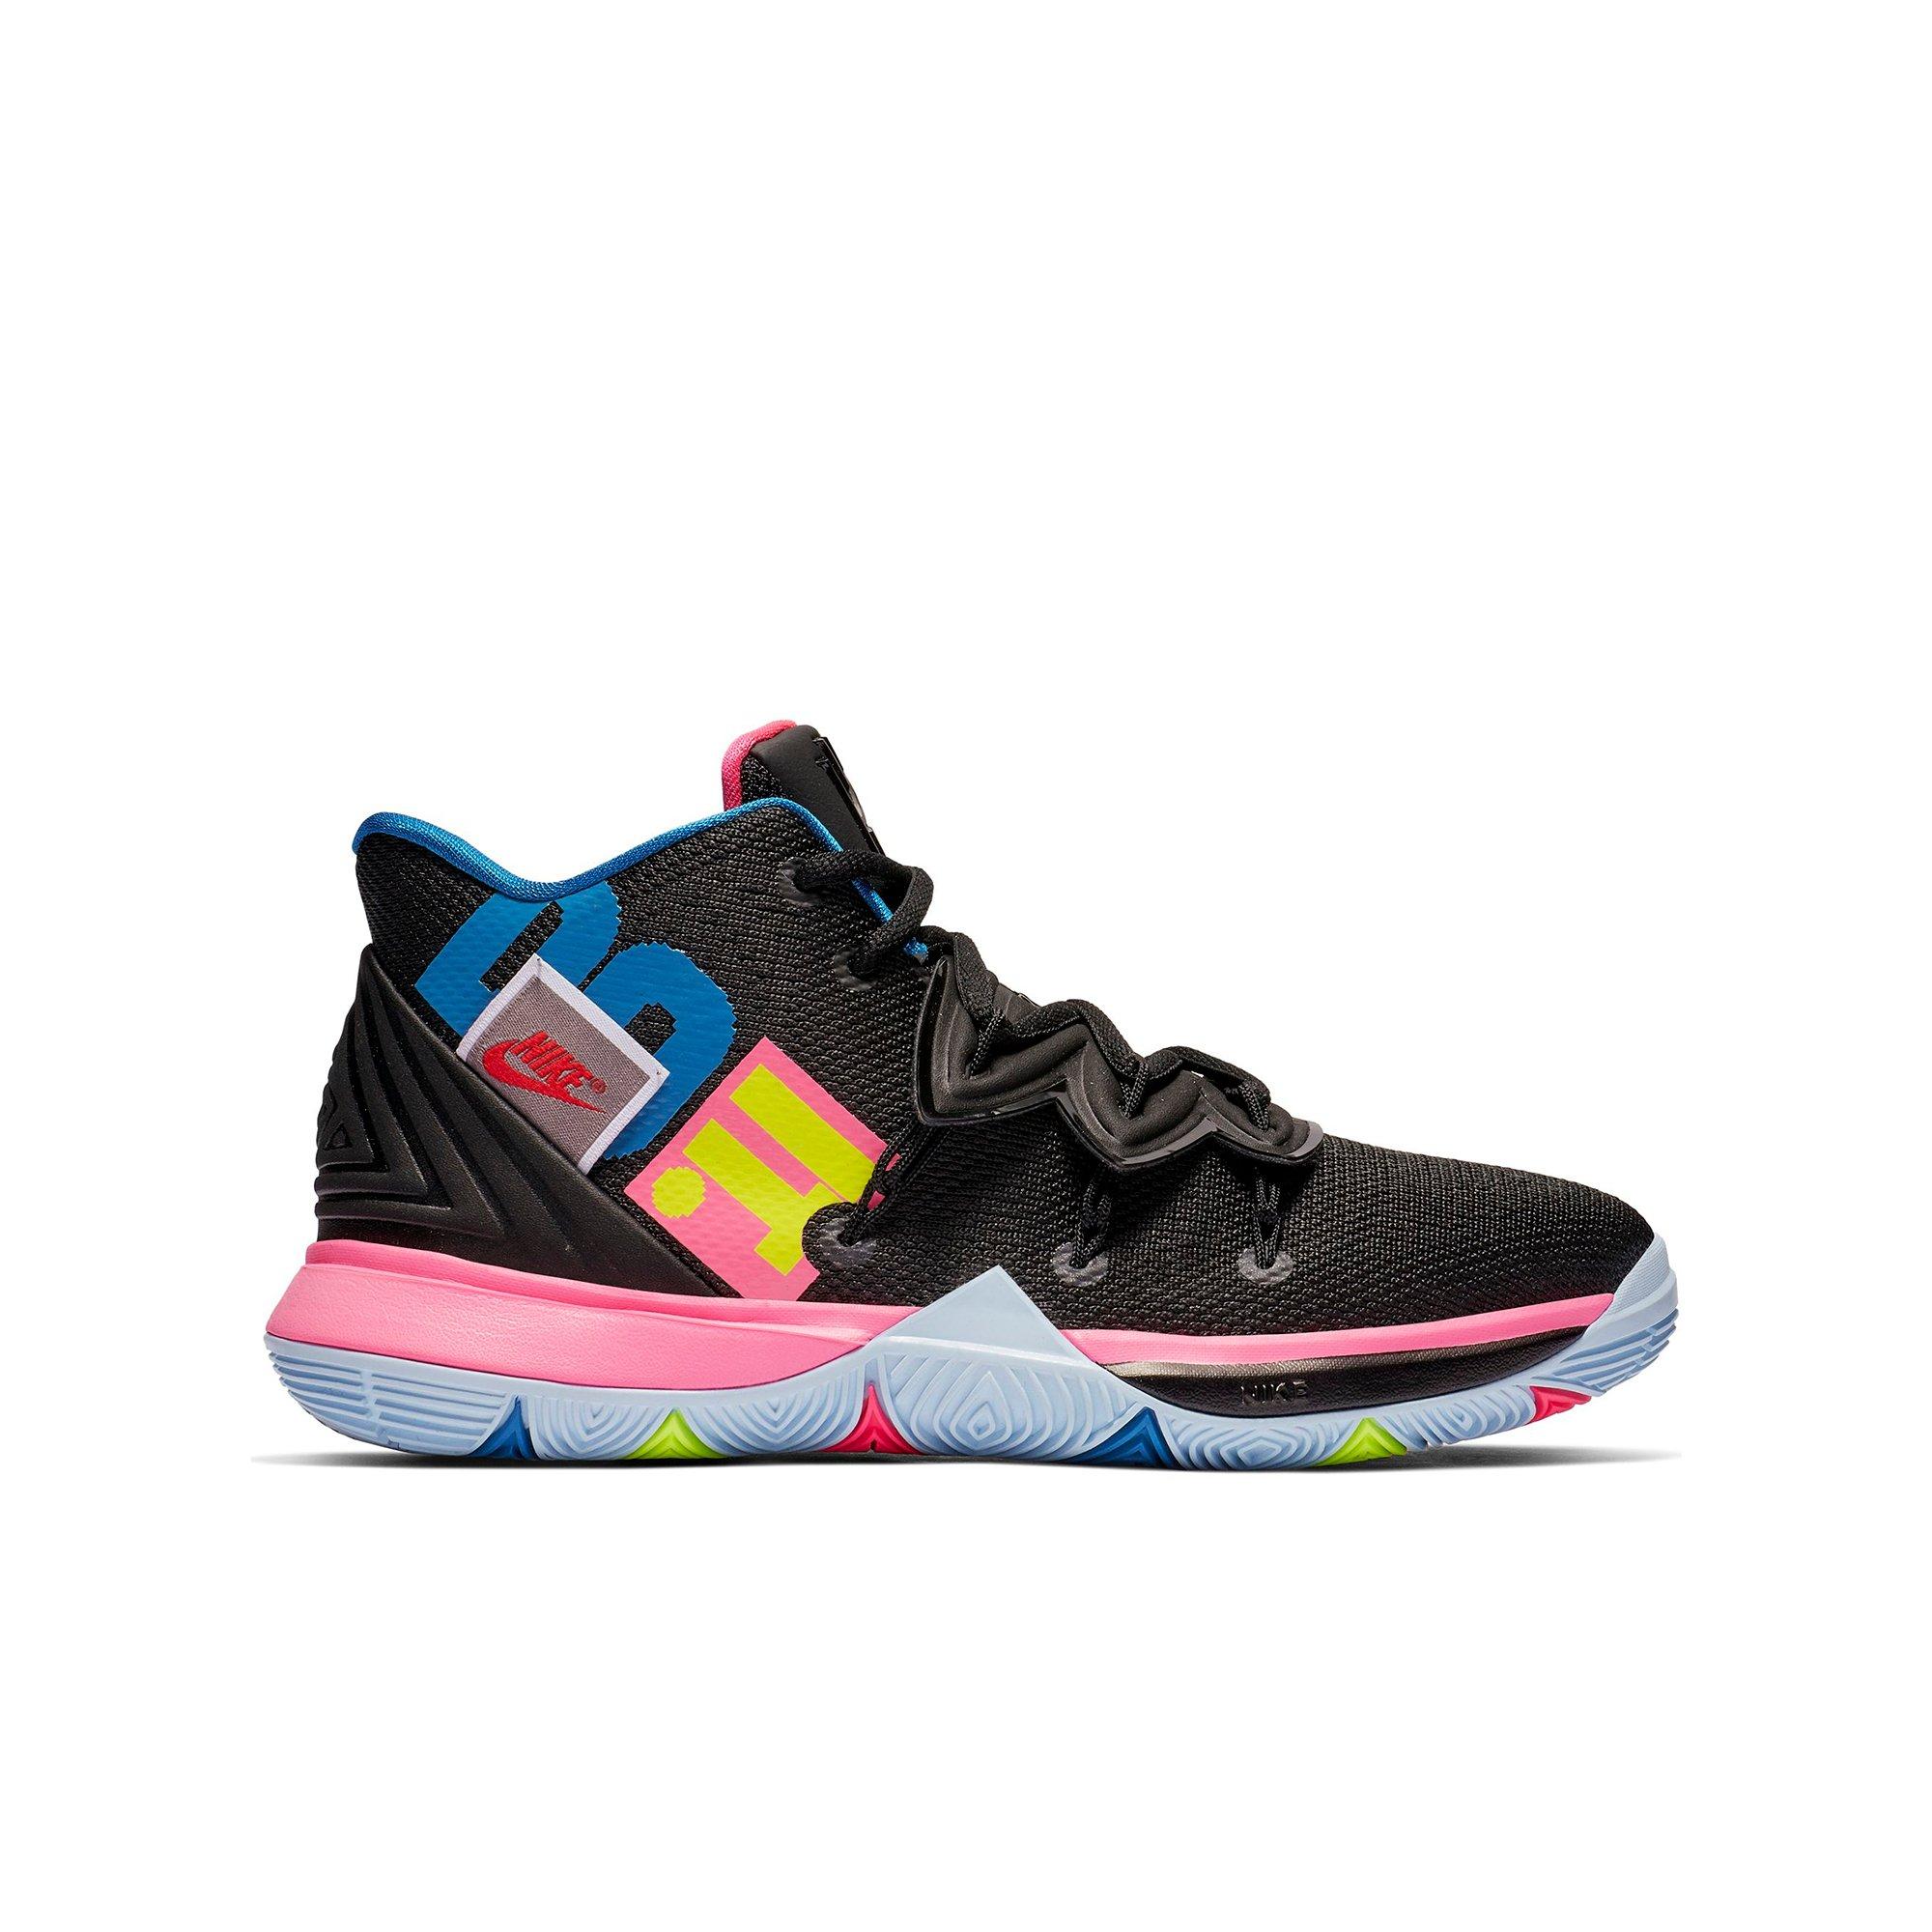 kyrie shoes 5 kids